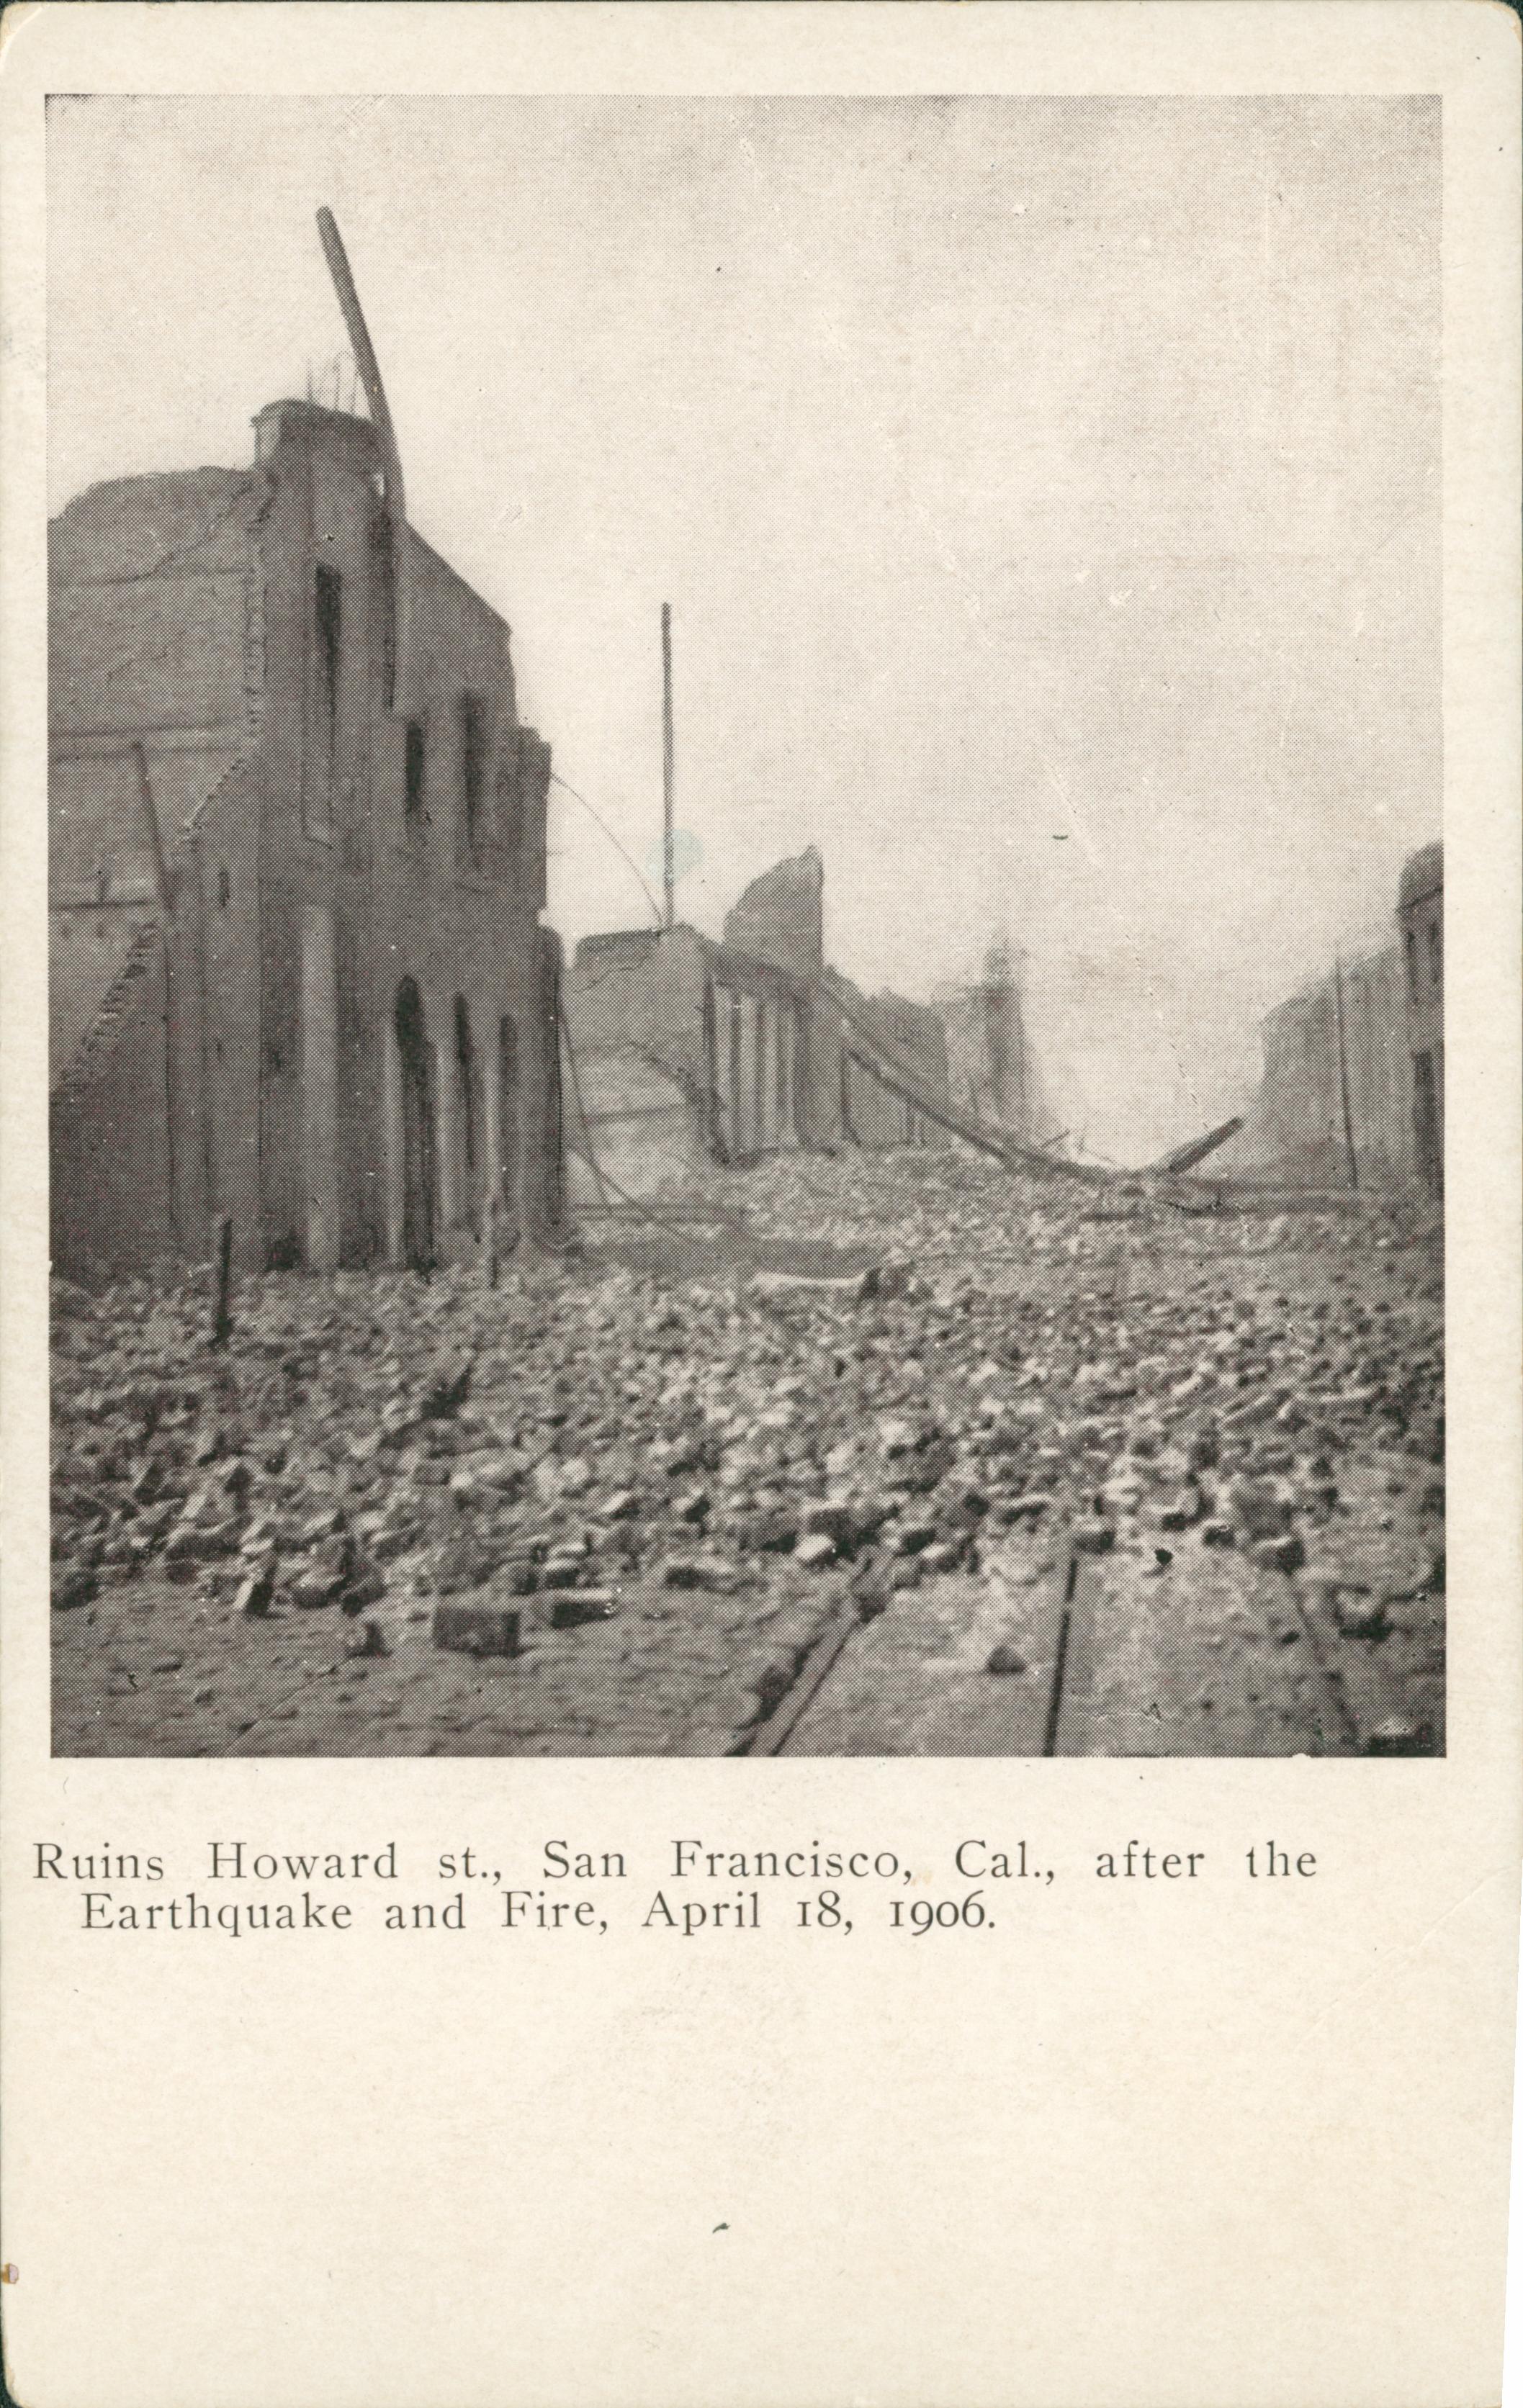 Shows Howard St. covered in rubble with destroyed buildings on both sides of the street.